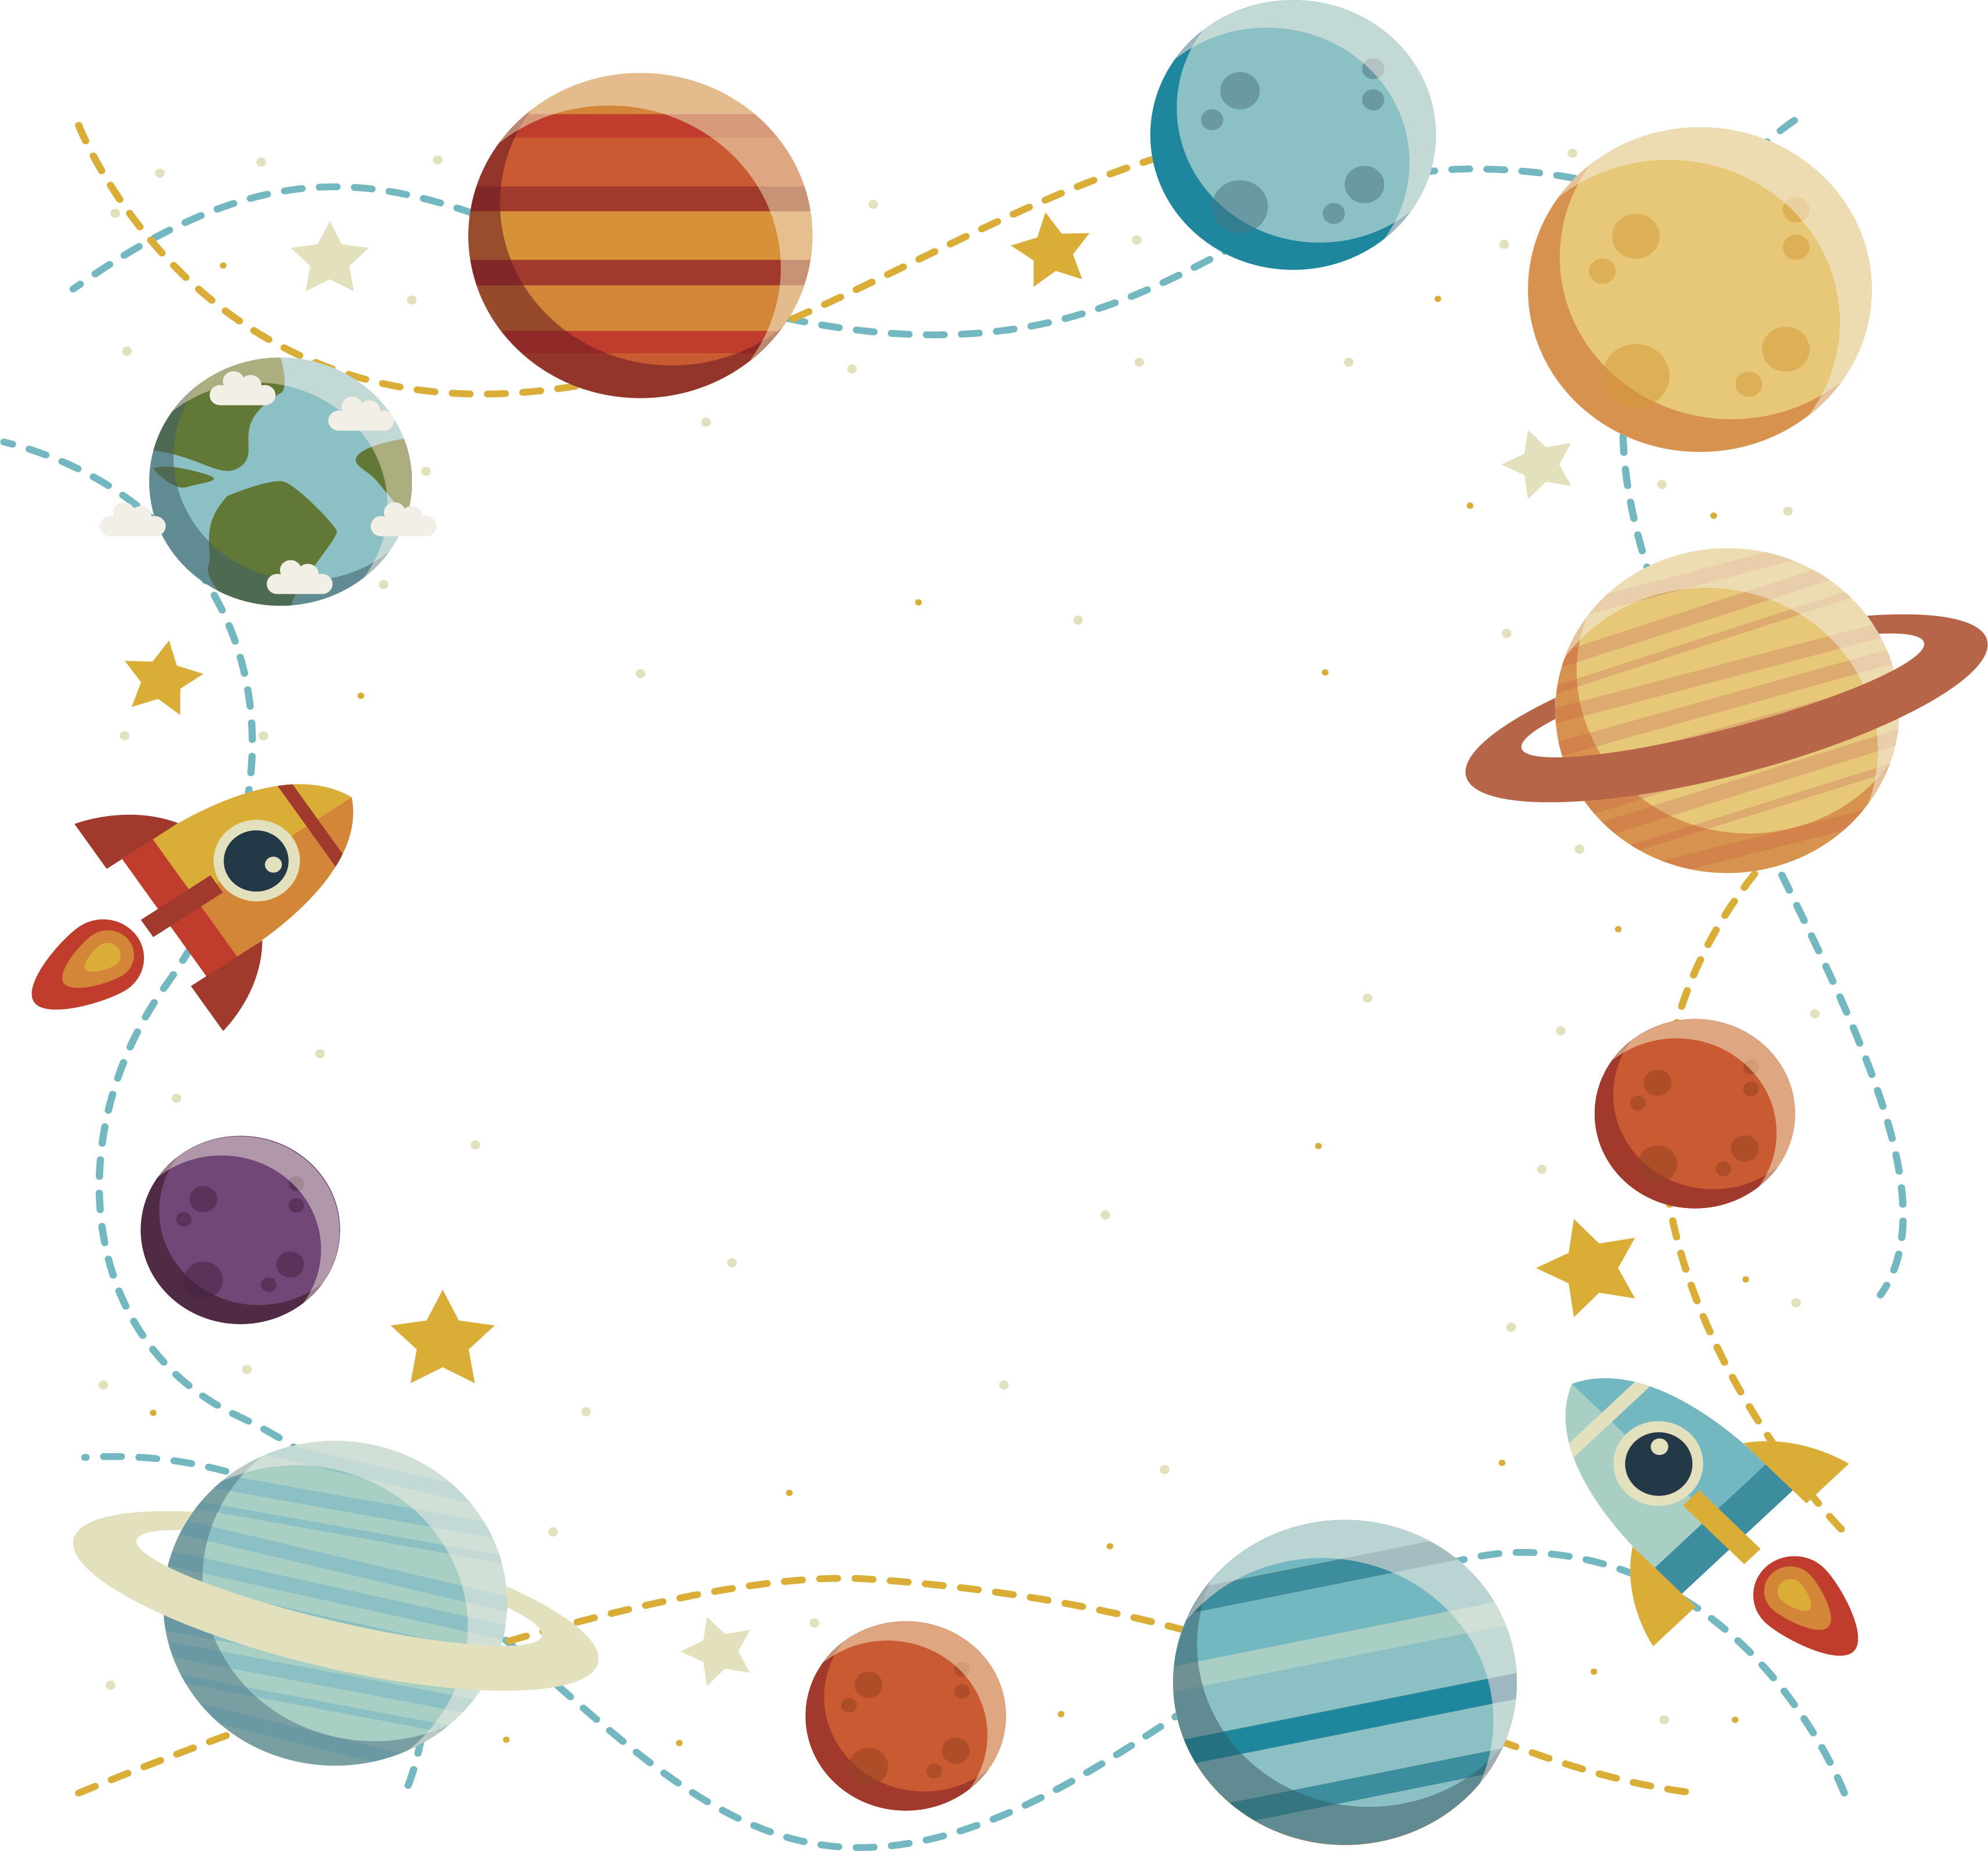 Yellow planet download outer. Planets clipart rocket